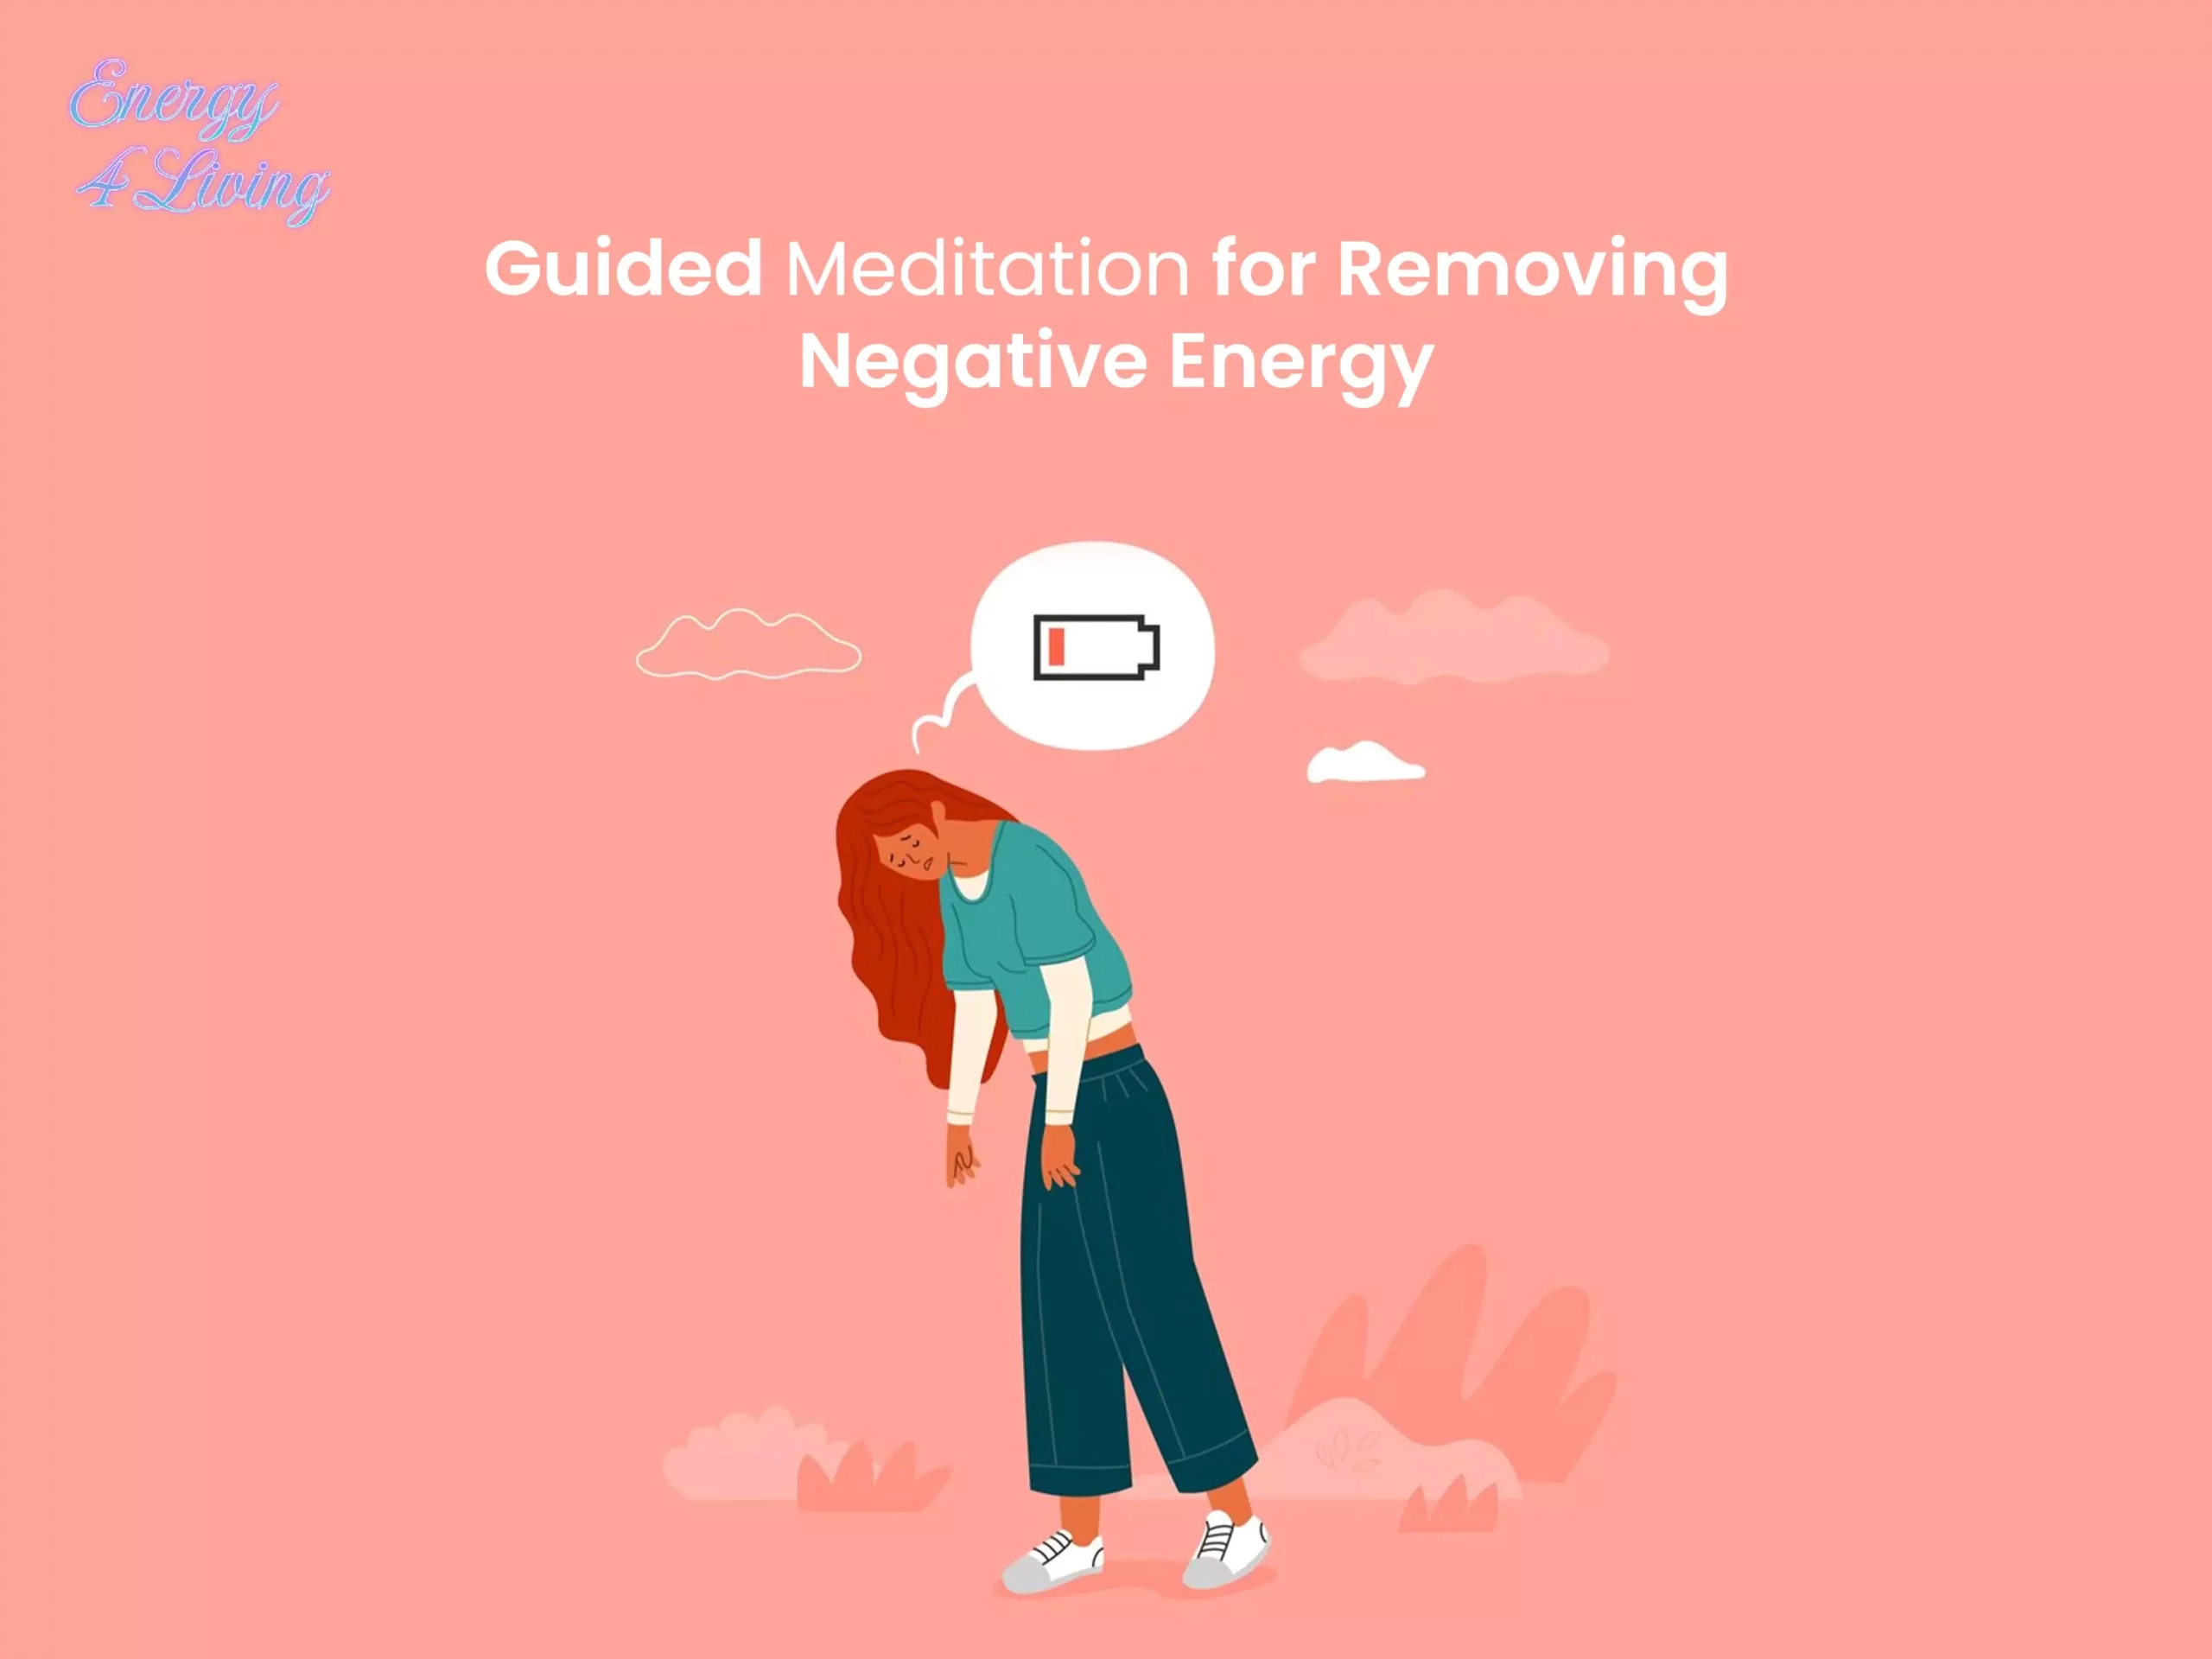 Guided Meditation for Removing Negative Energy